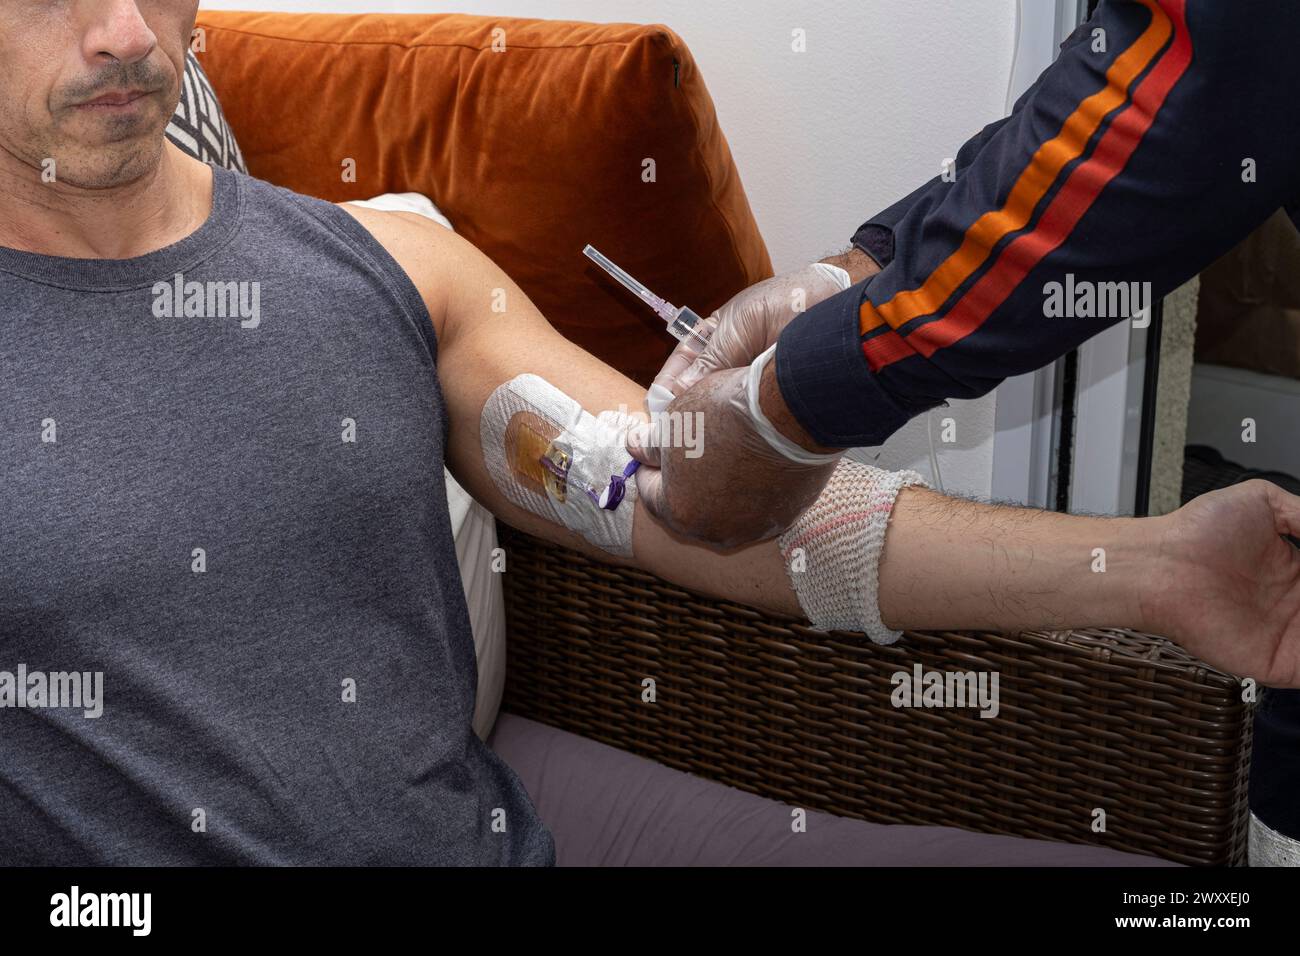 Nurse, with protective gloves, cleaning the nozzle accessing the catheter. Stock Photo